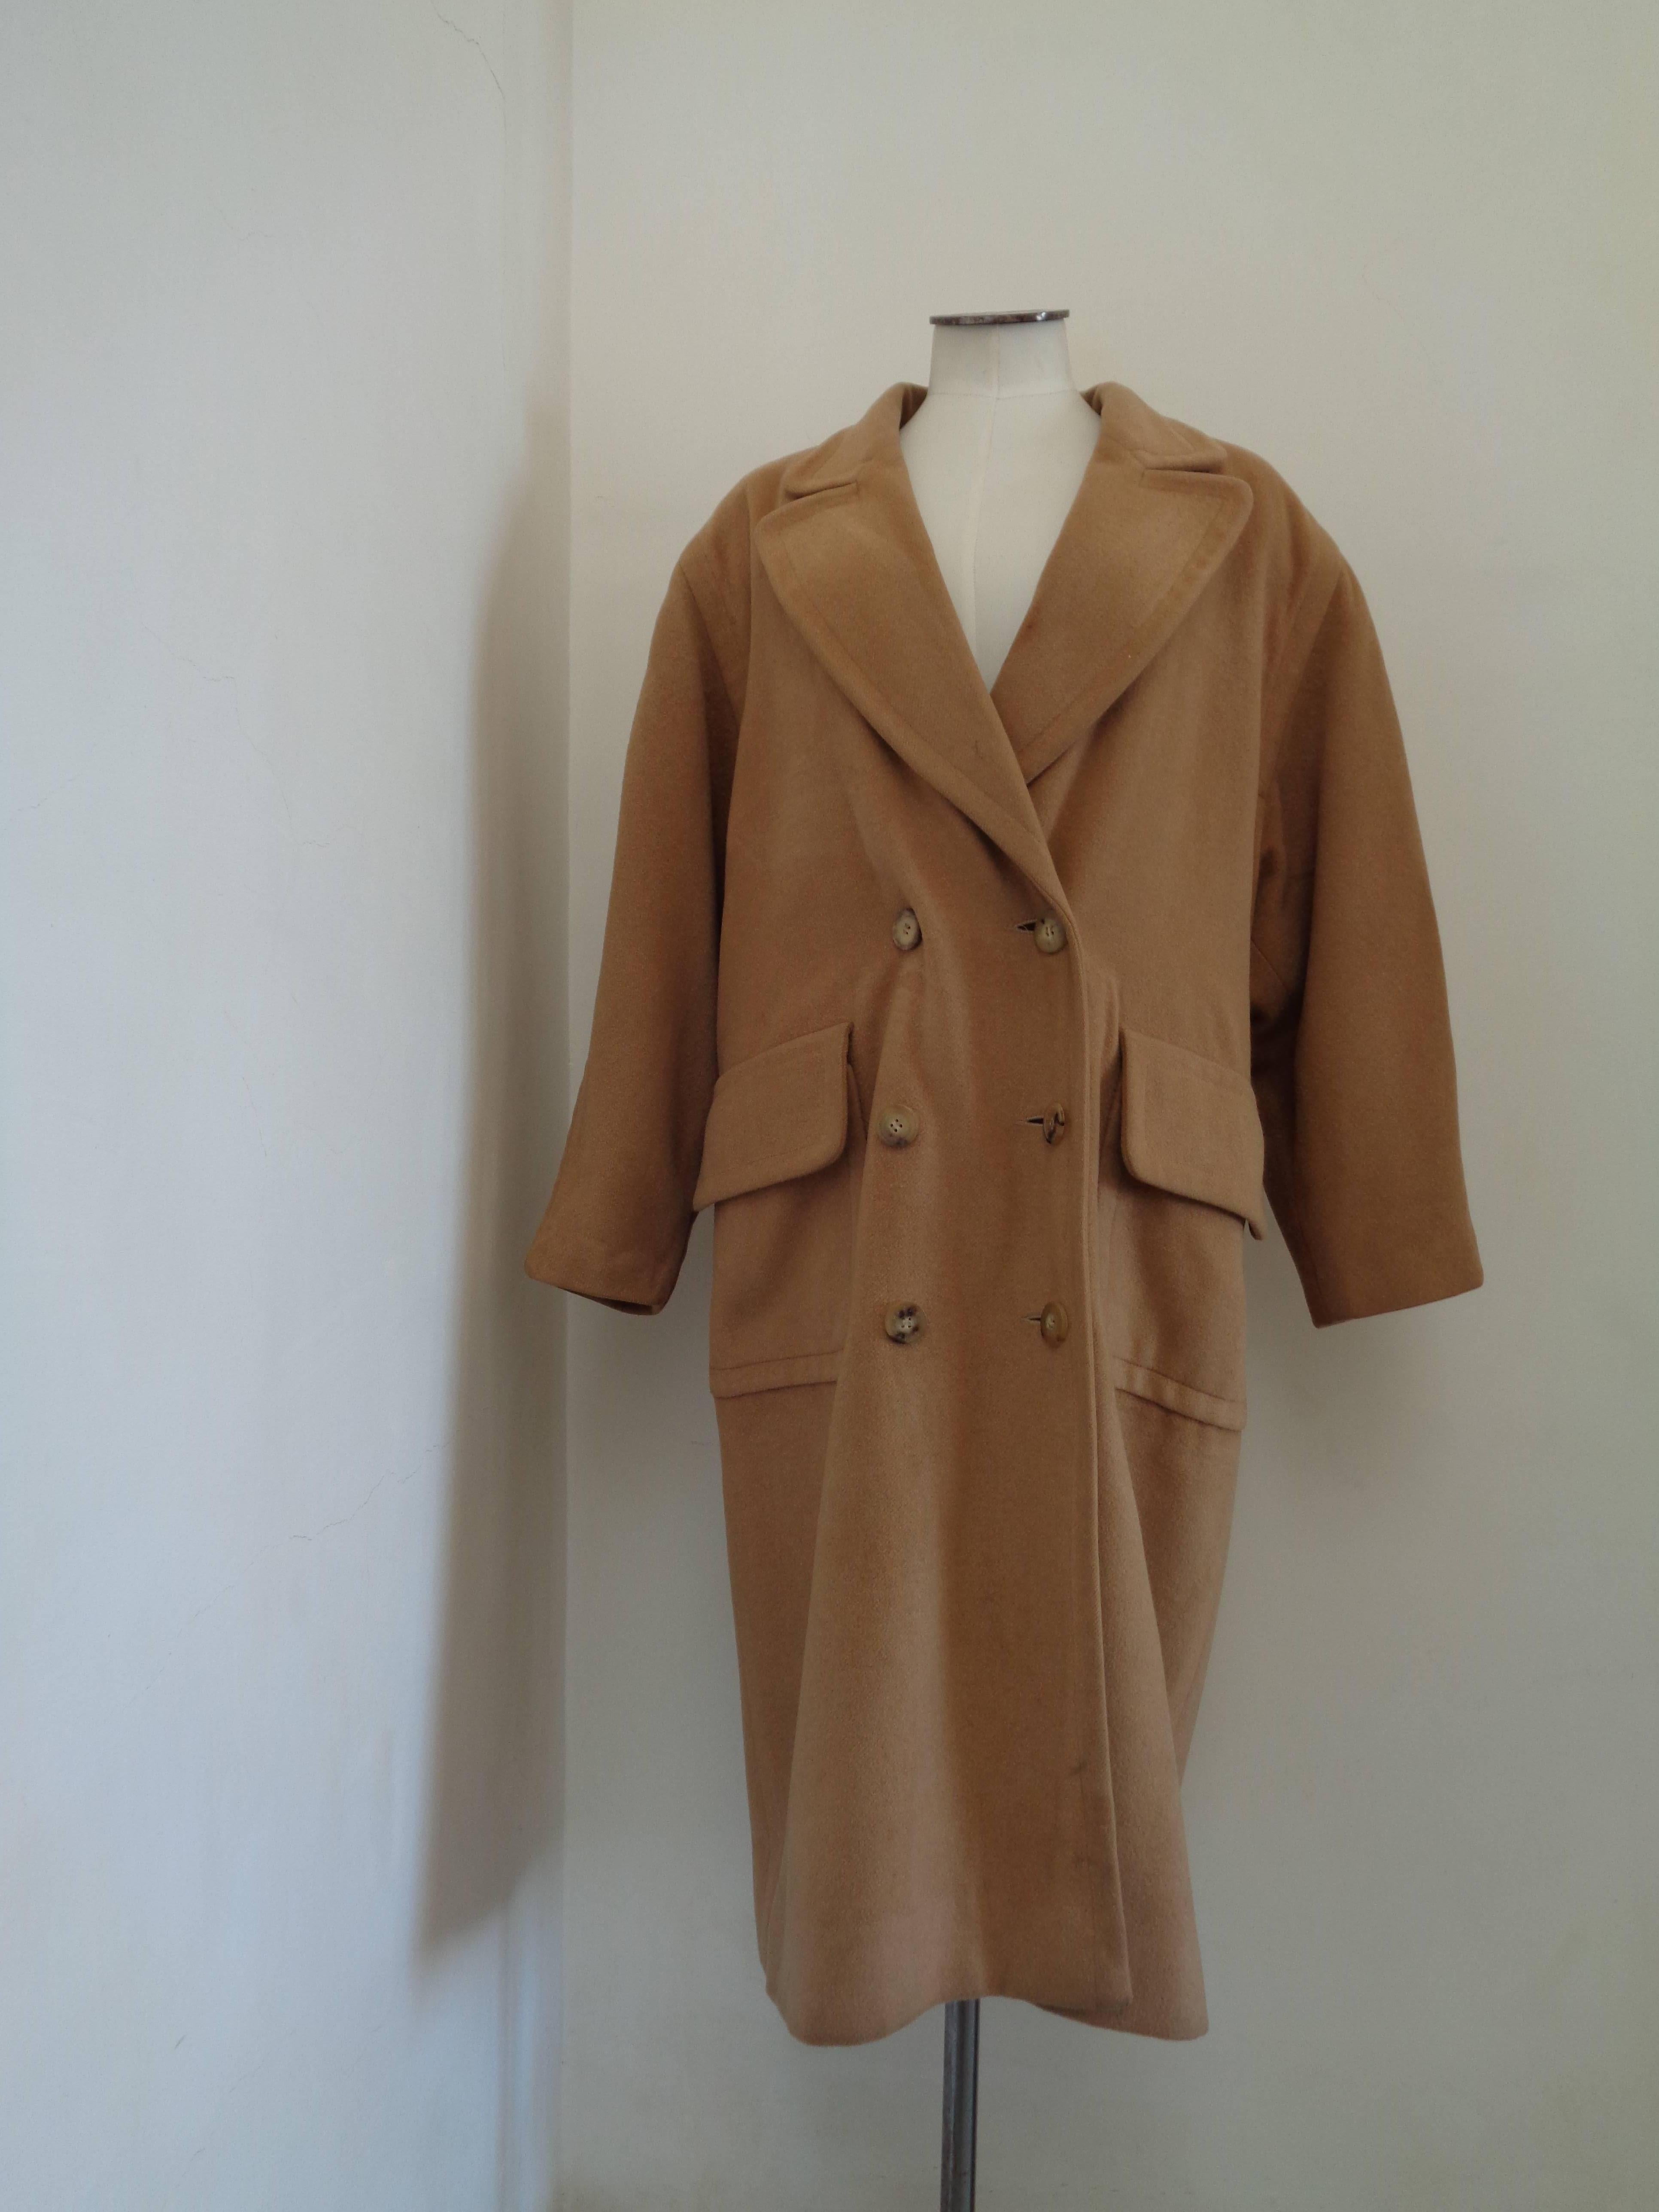 Hermes Paris Brown Cashmere Coat

Totally made in france in size xs